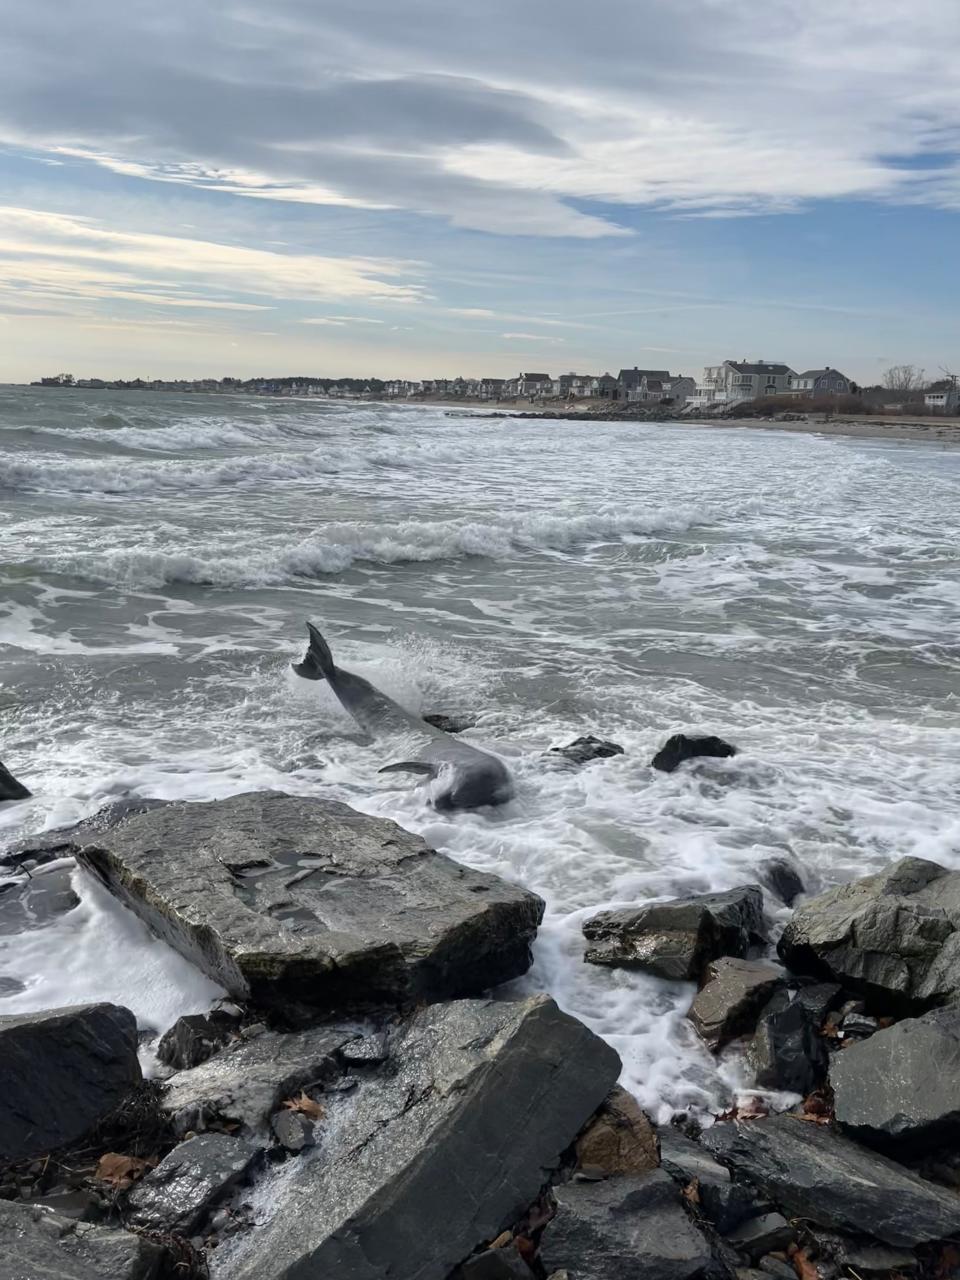 A  600-pound, female bottlenose dolphin was reported along the rocks at Wallis Sands last Wednesday, Jan. 19, before dying during a rescue attempt.